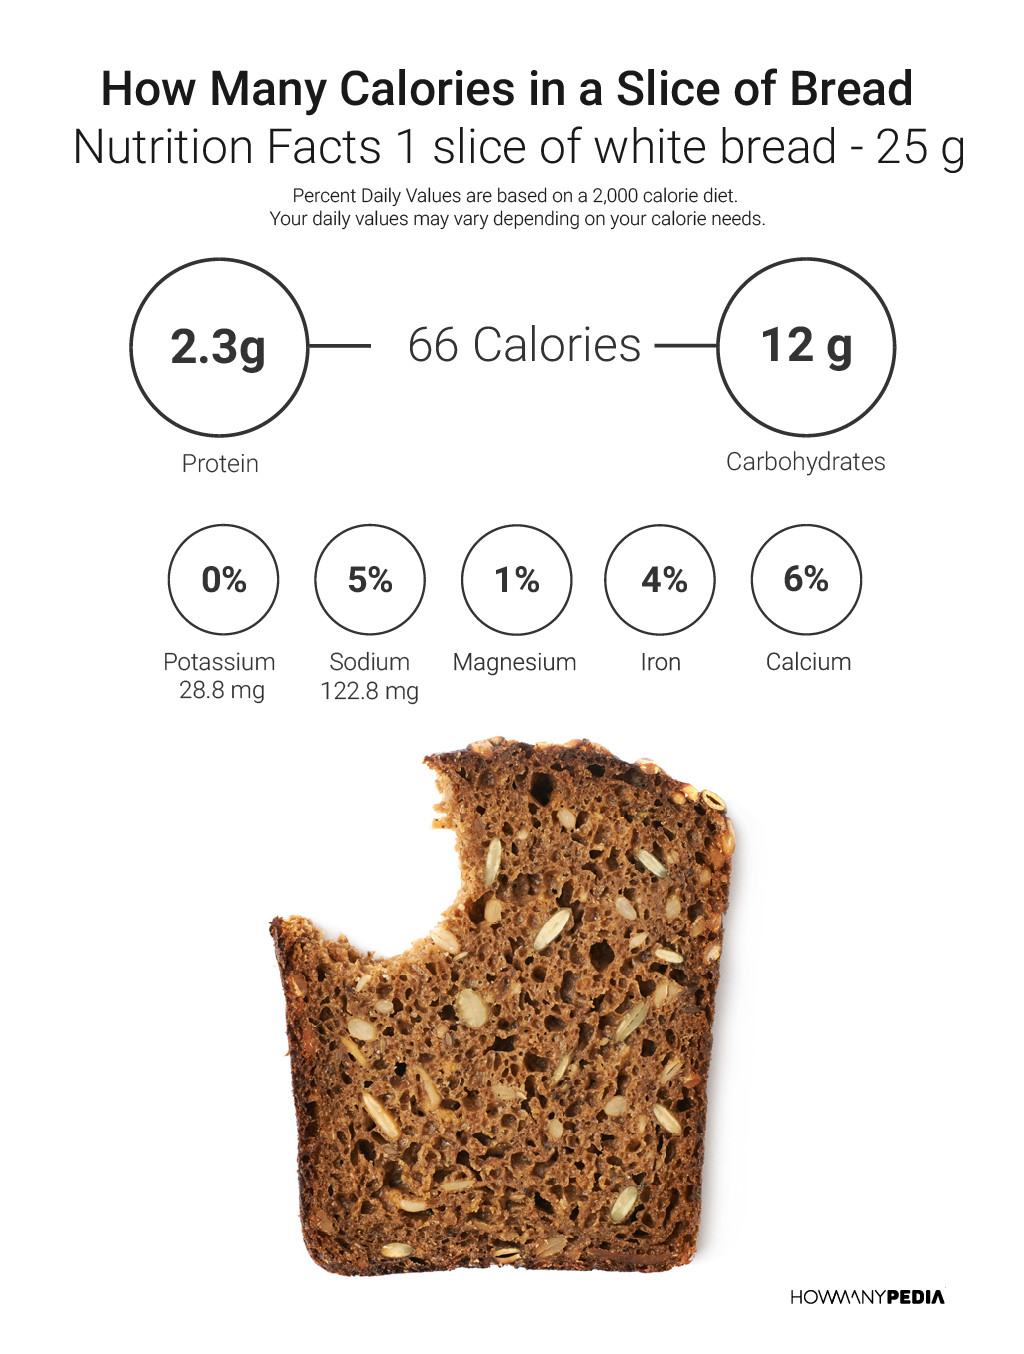 Carbs Bread Slice
 How Many Calories in a Slice of Bread Howmanypedia